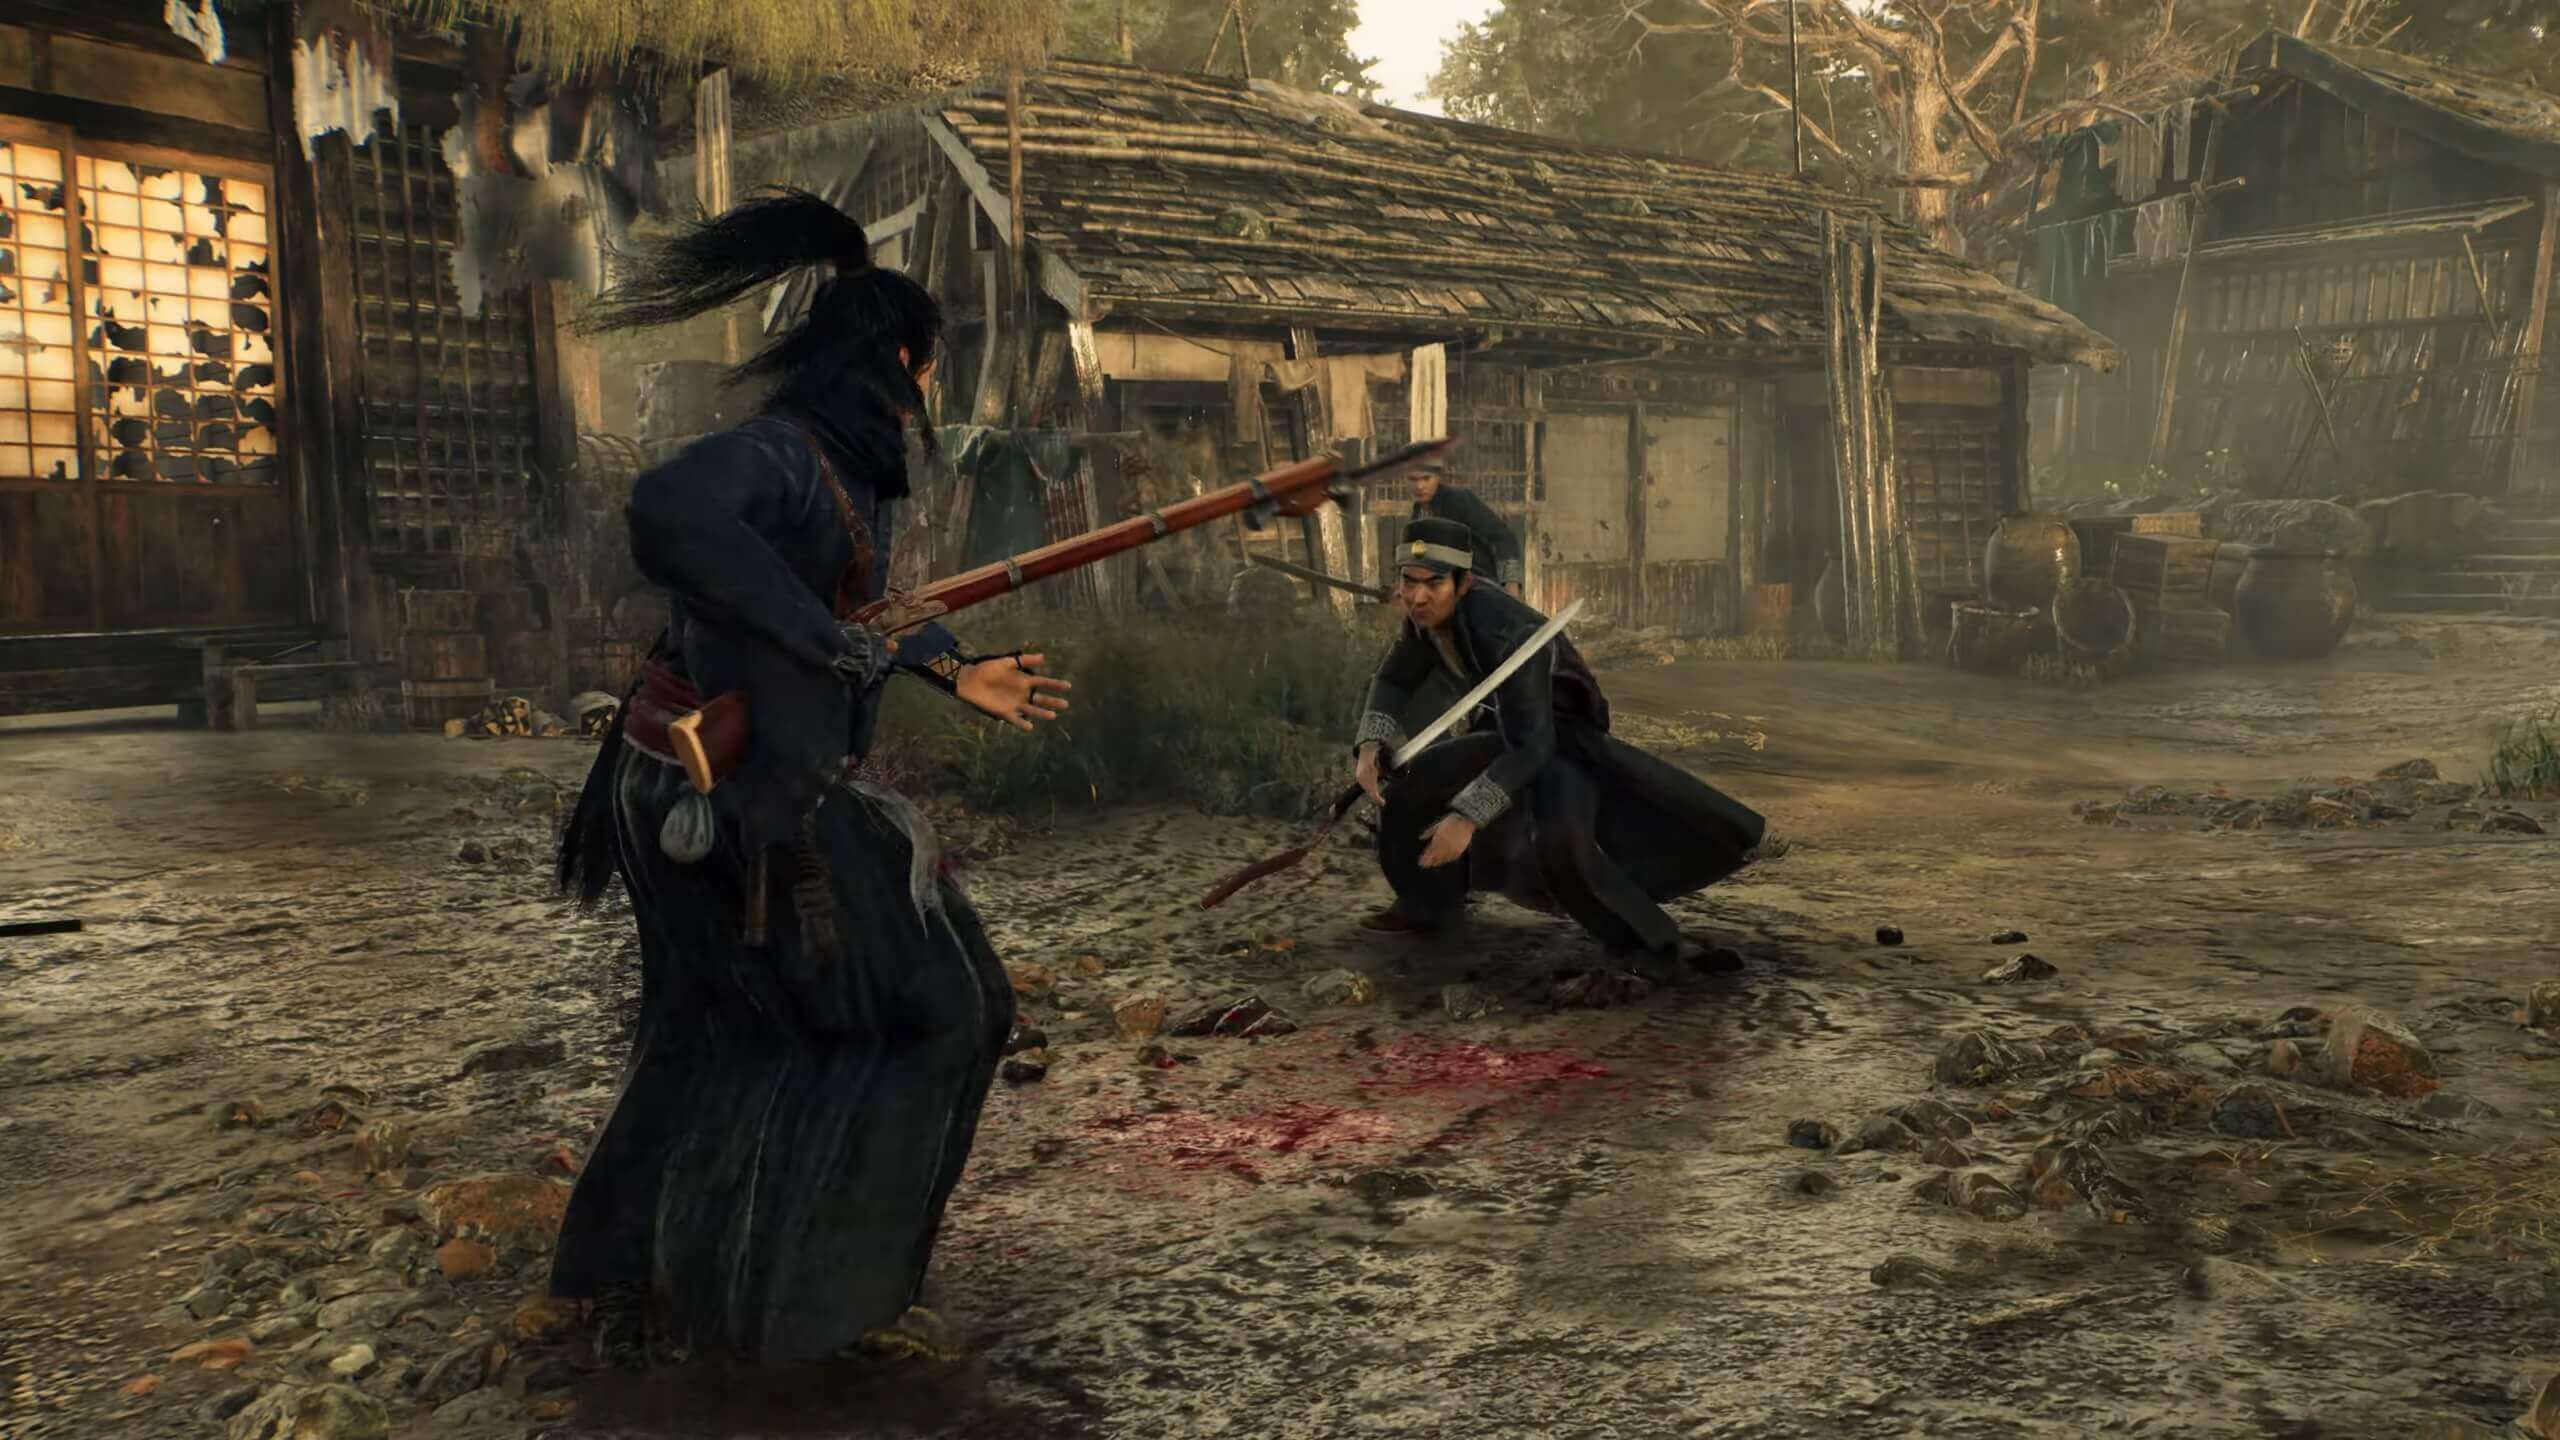 It's only glimpsed, but Rise of the Ronin looks like another brilliant Team Ninja combat showcase.